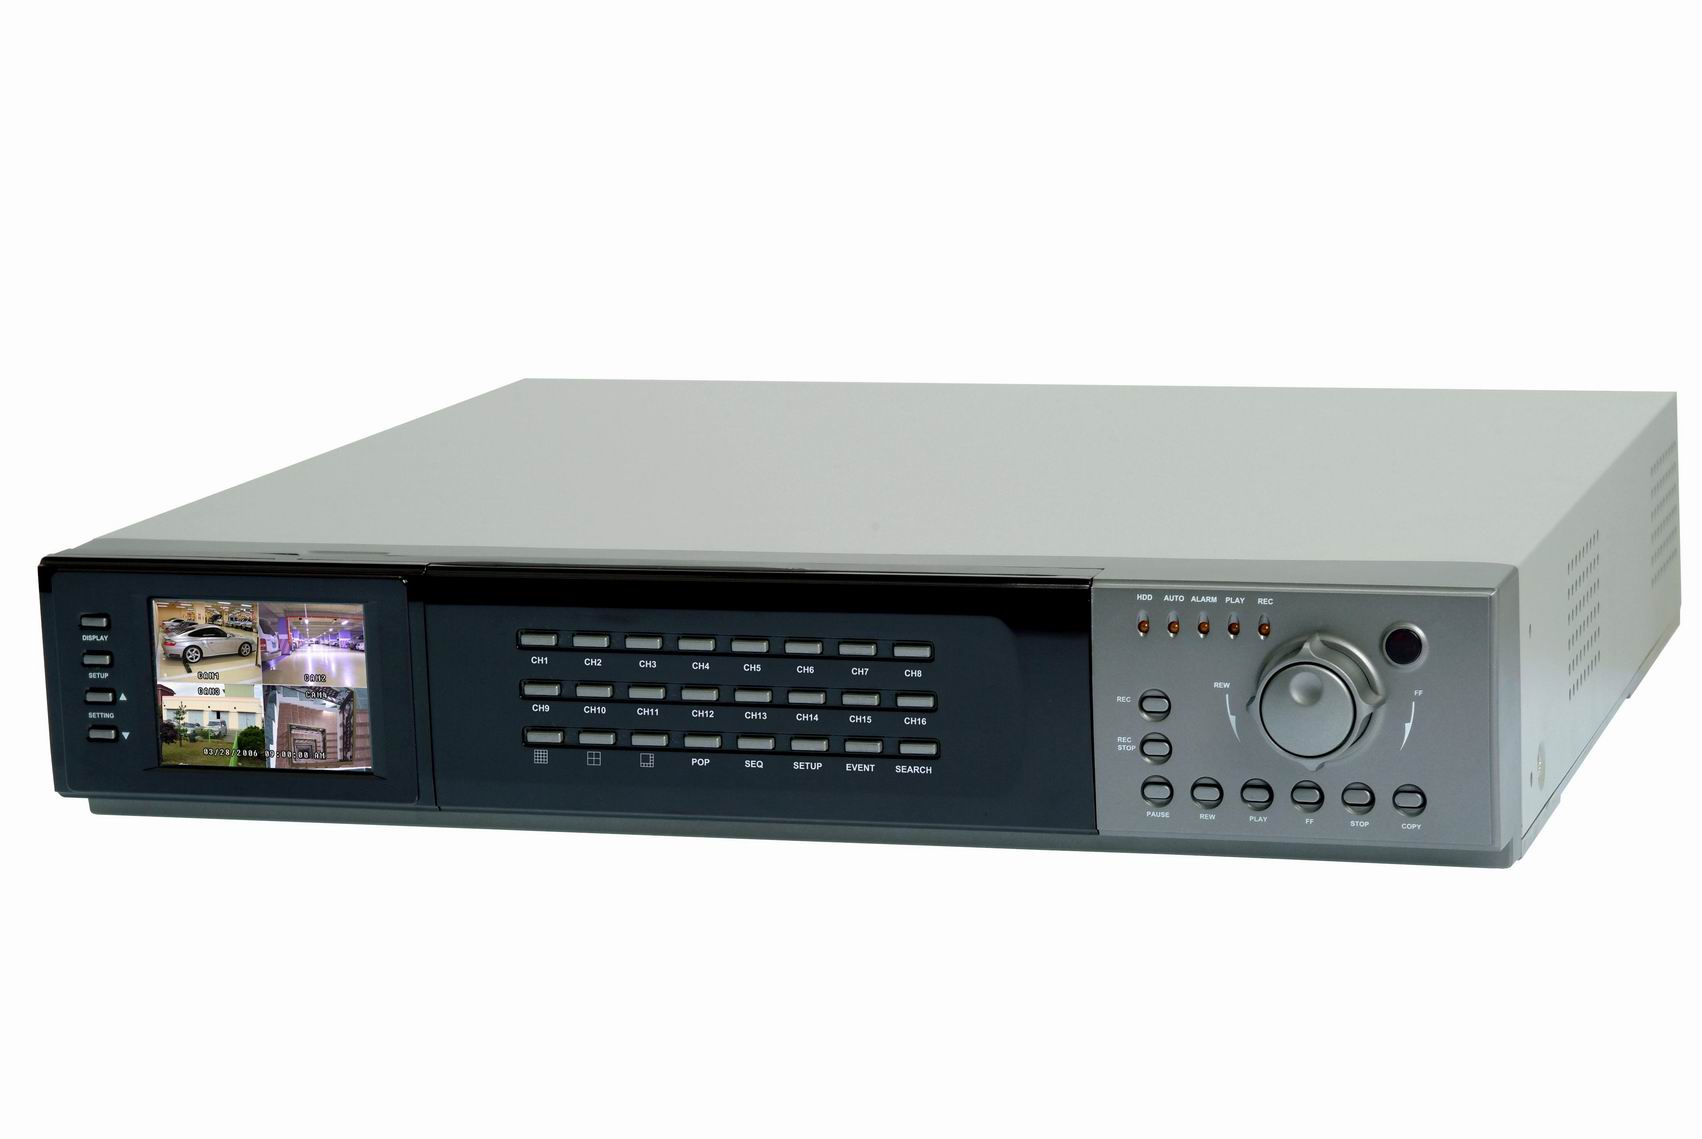  DVR Stand Alone (16ch, Mpeg4) -Bvr516 (DVR Stand Alone (16CH, MPEG4)-Bvr516)